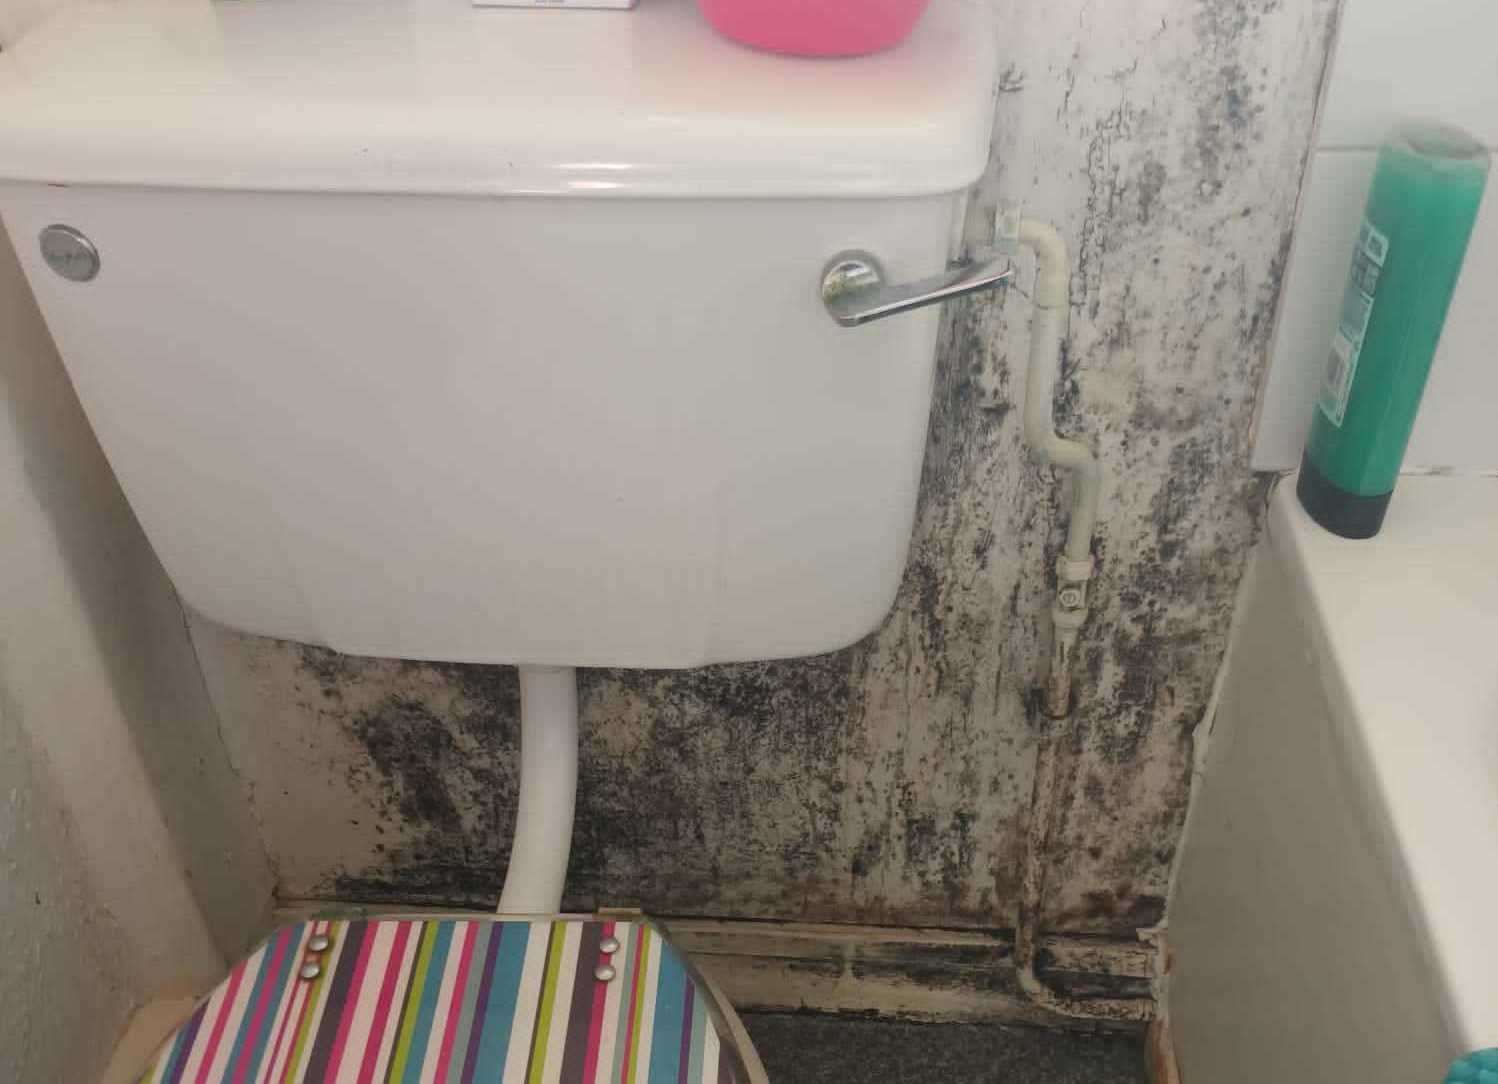 Mould on the wall of the bathroom. Picture: Emily Cave